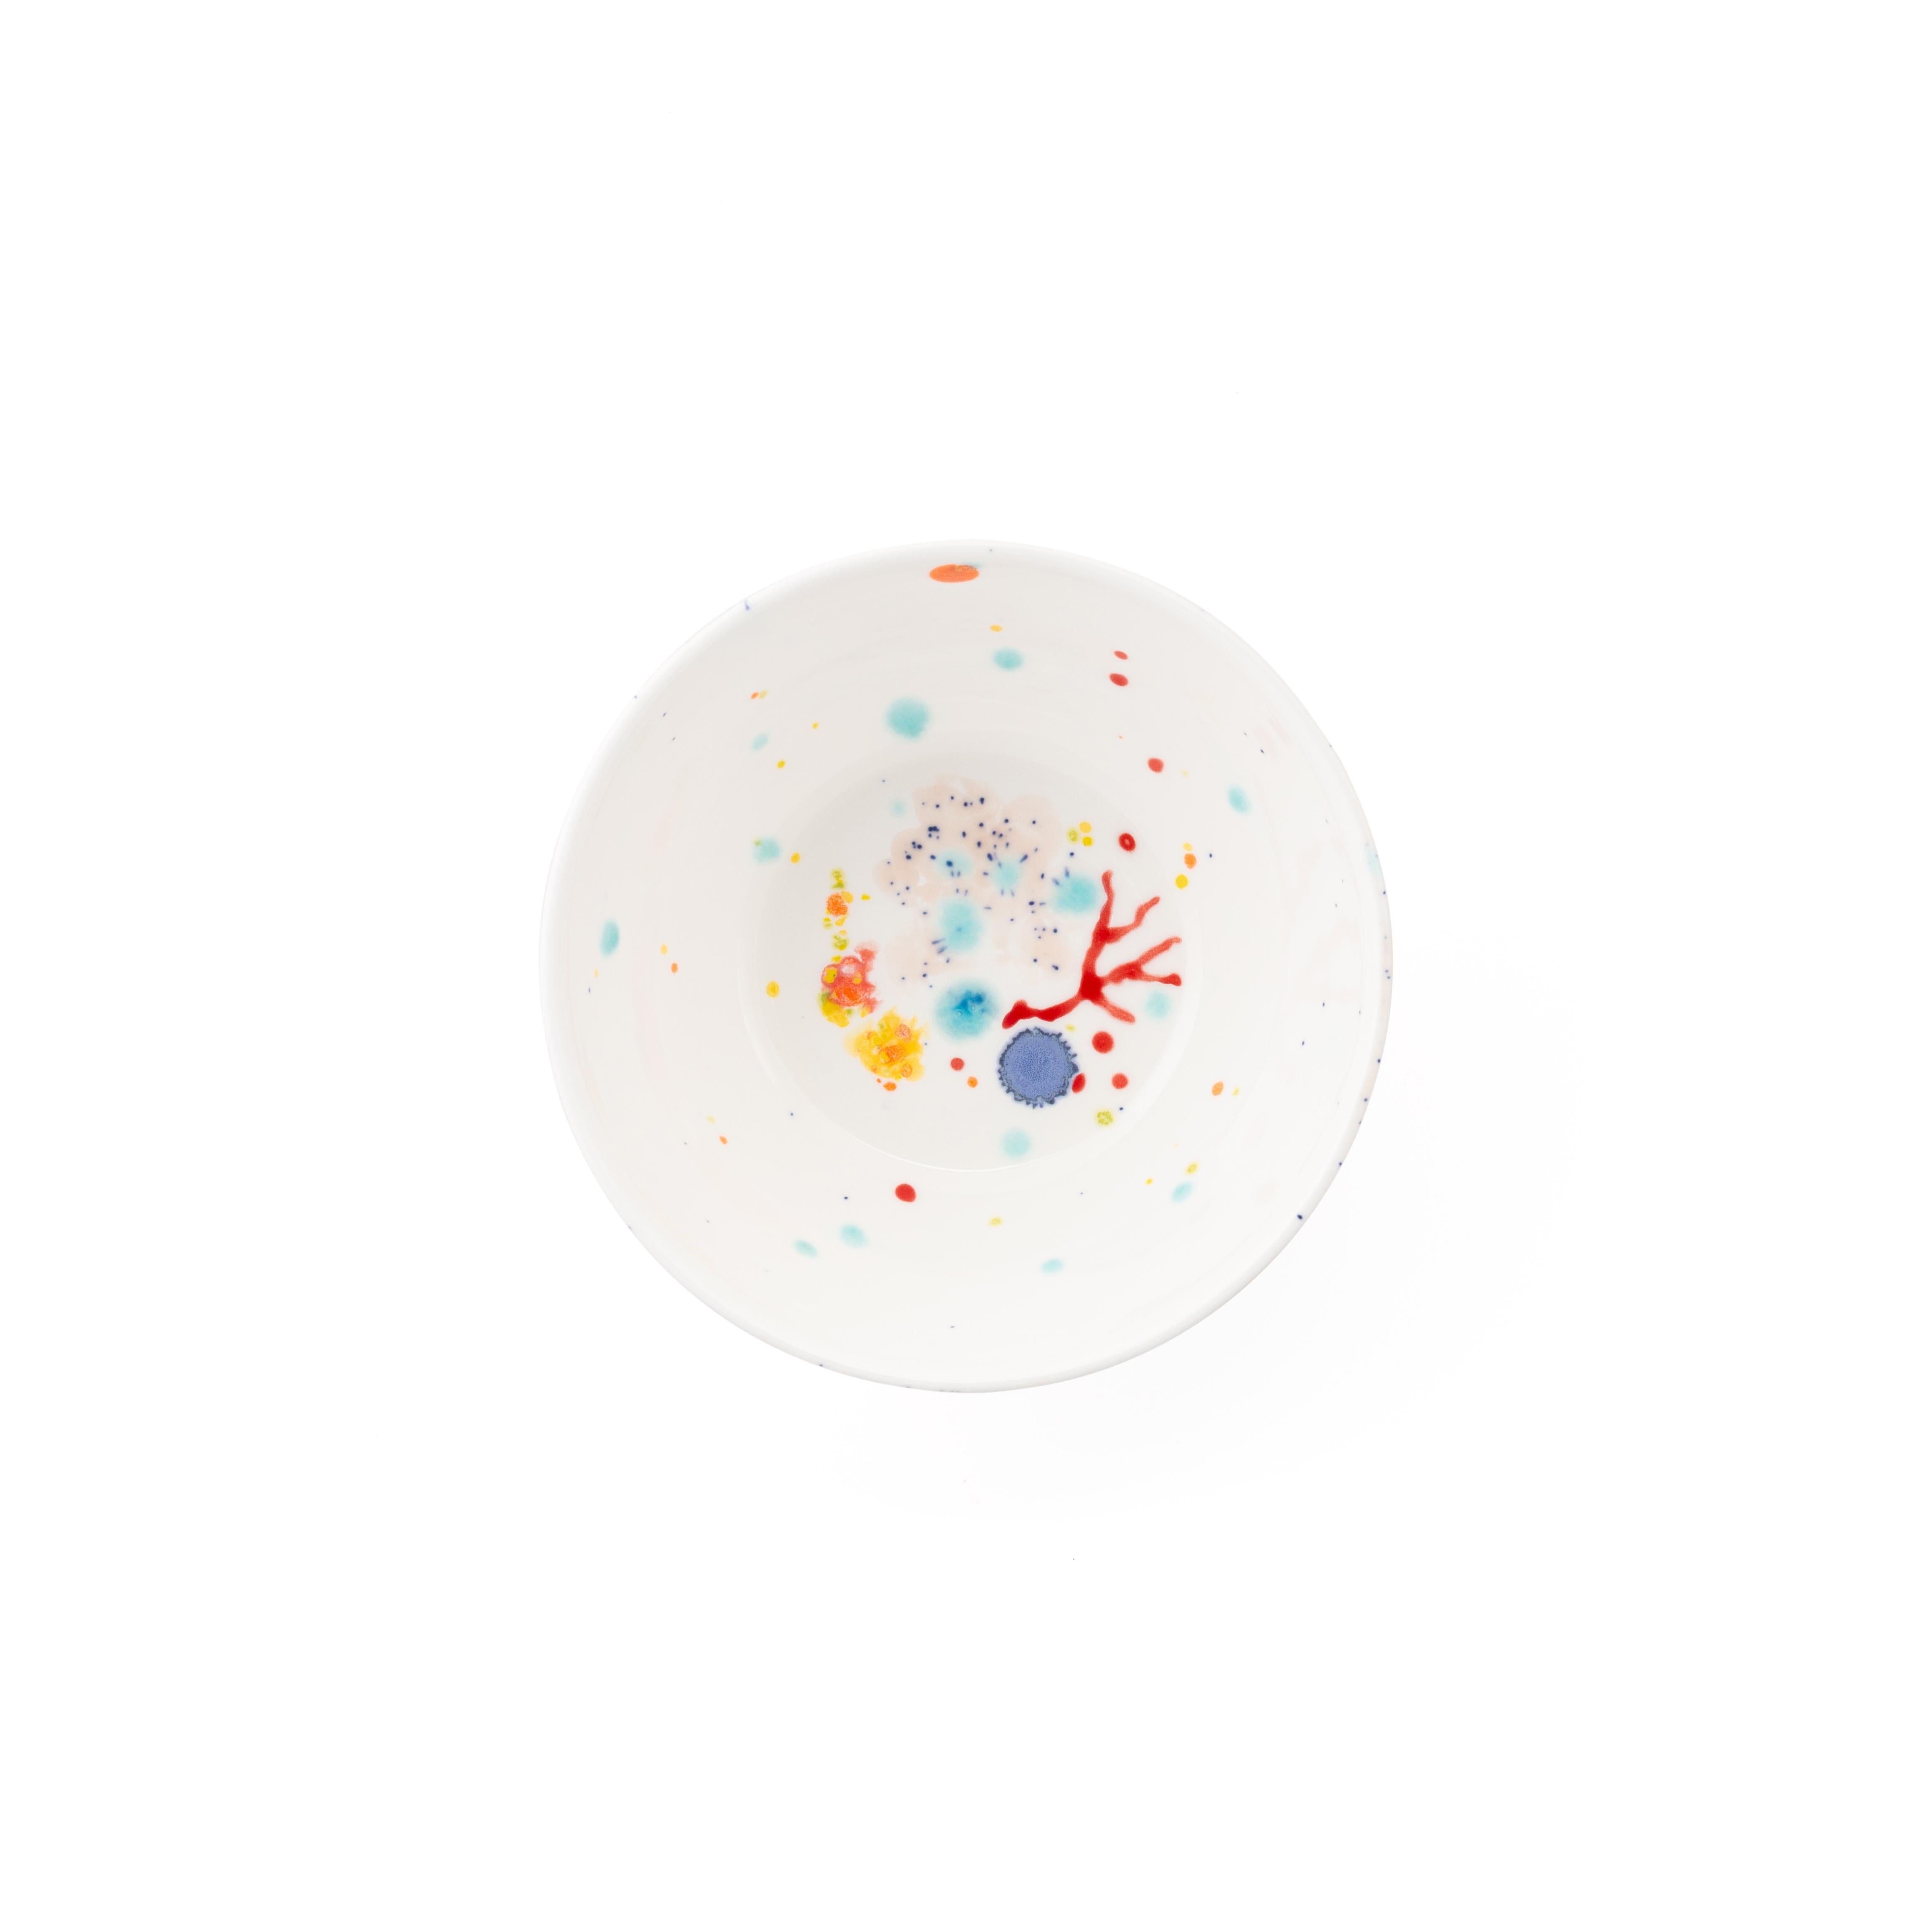 Handcrafted in Italy from the finest porcelain, these white seabed fruit bowls have corals lying on a bright bottom surrounded by mysterious multicolored gems floating amid brushes of light pink sand sprinkled with black dots.

Set of 2 white